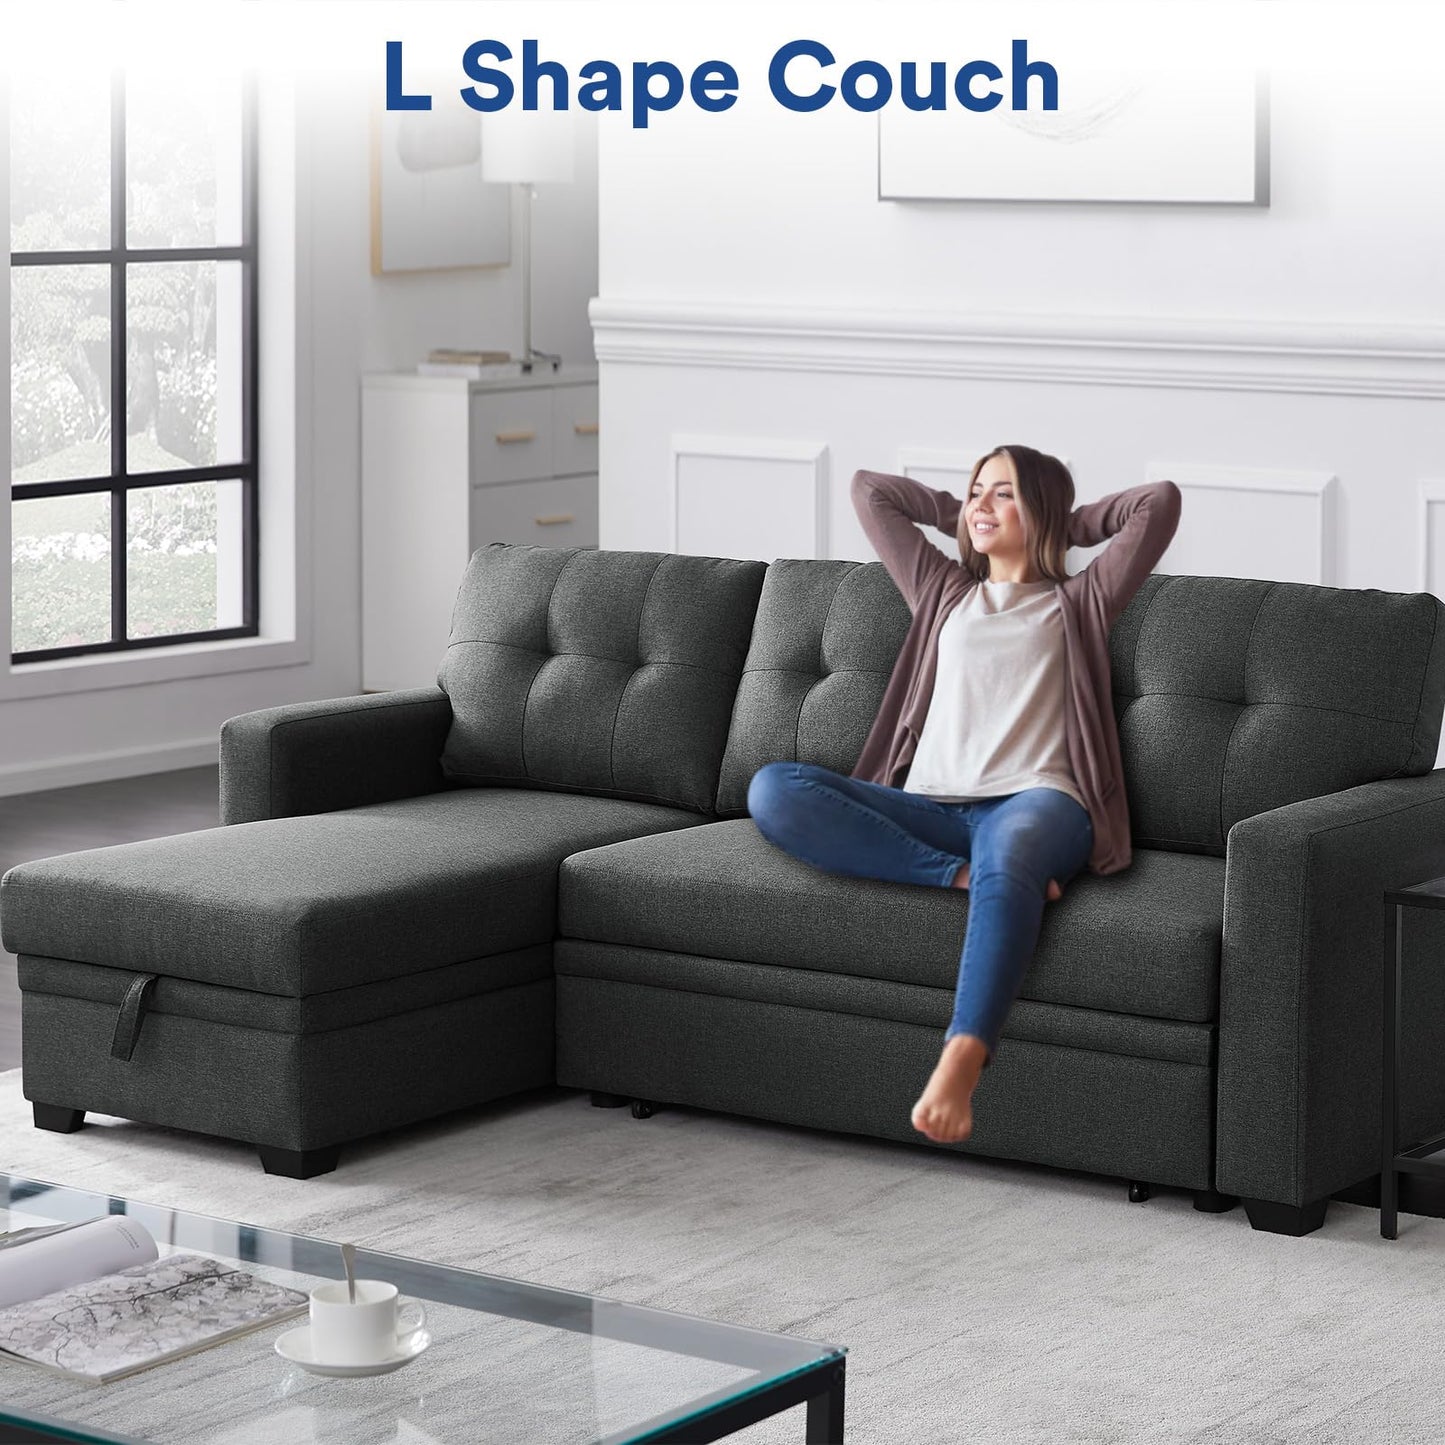 Rovibek L Shaped Chaise Couch with Storage and Pull Out Bed Multifunctional Comfy Sectional Sleeper Sofa for Living Room, Apartment, Bedroom, Office, Dark Gray